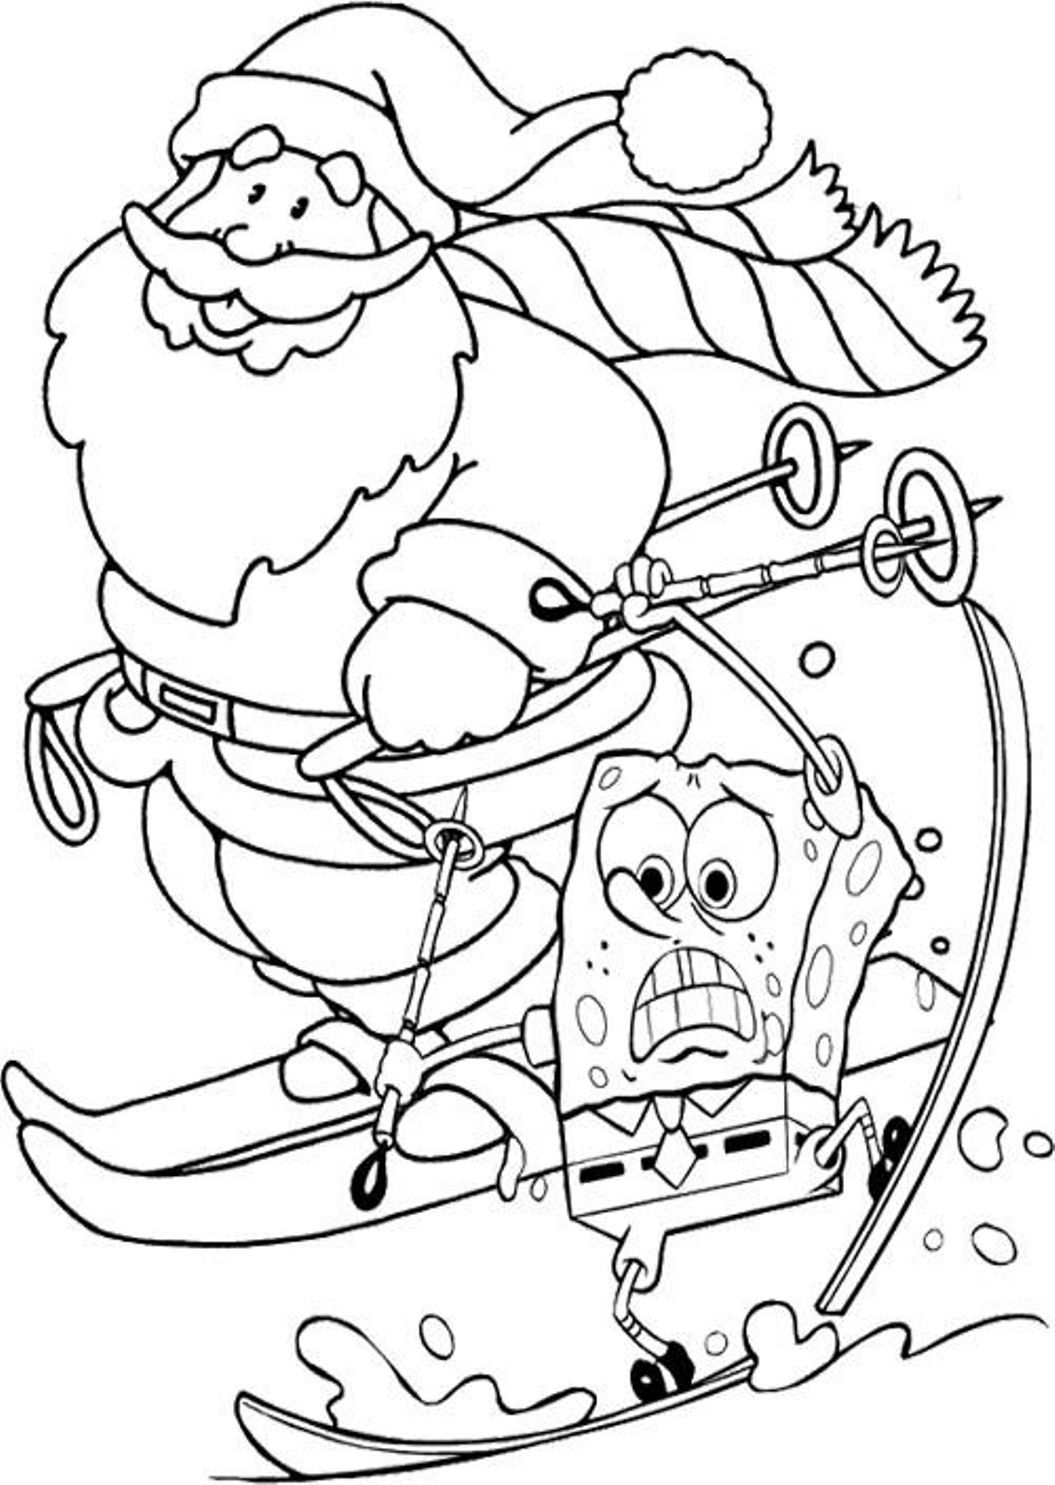 Spongebob Coloring Pages Christmas - Coloring Home